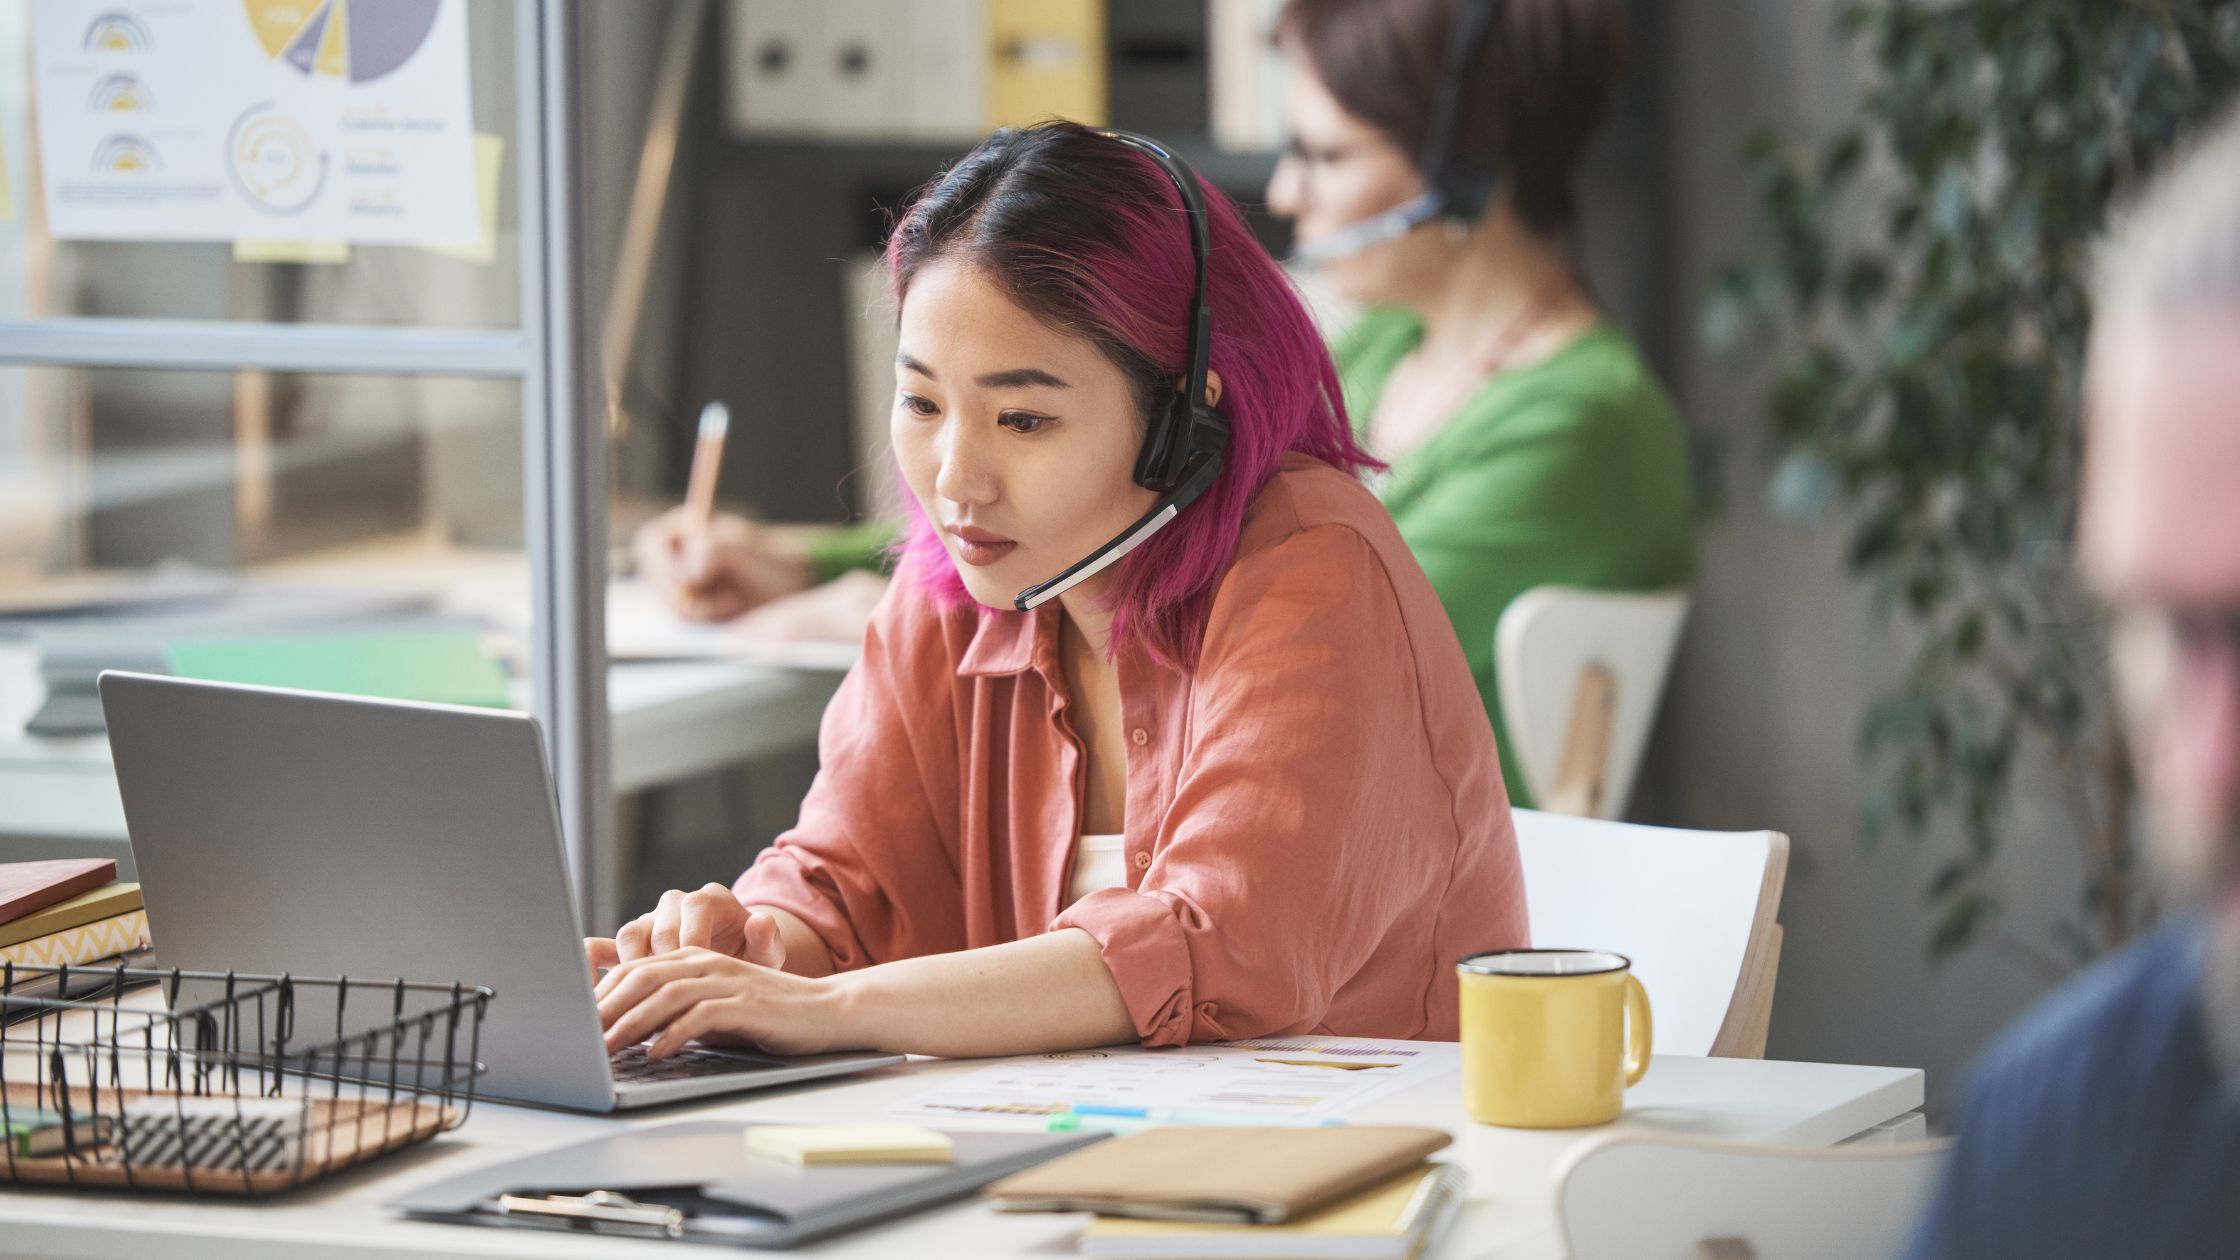 10 most important metrics for any remote or hybrid call center